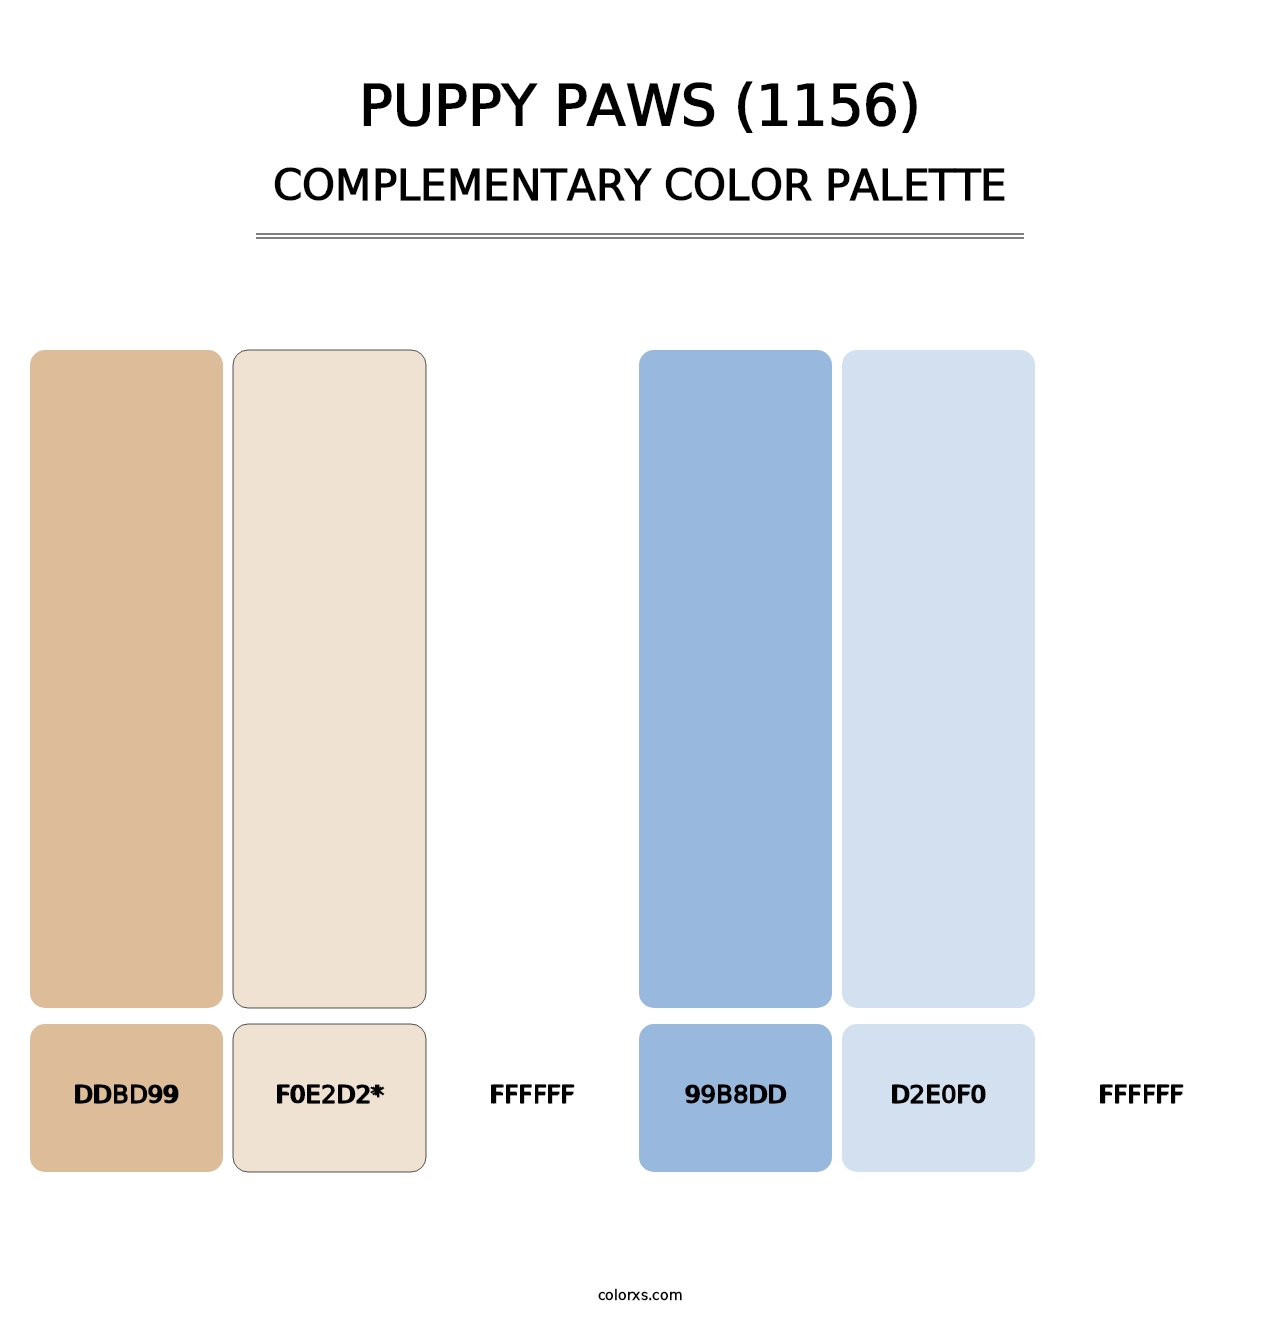 Puppy Paws (1156) - Complementary Color Palette